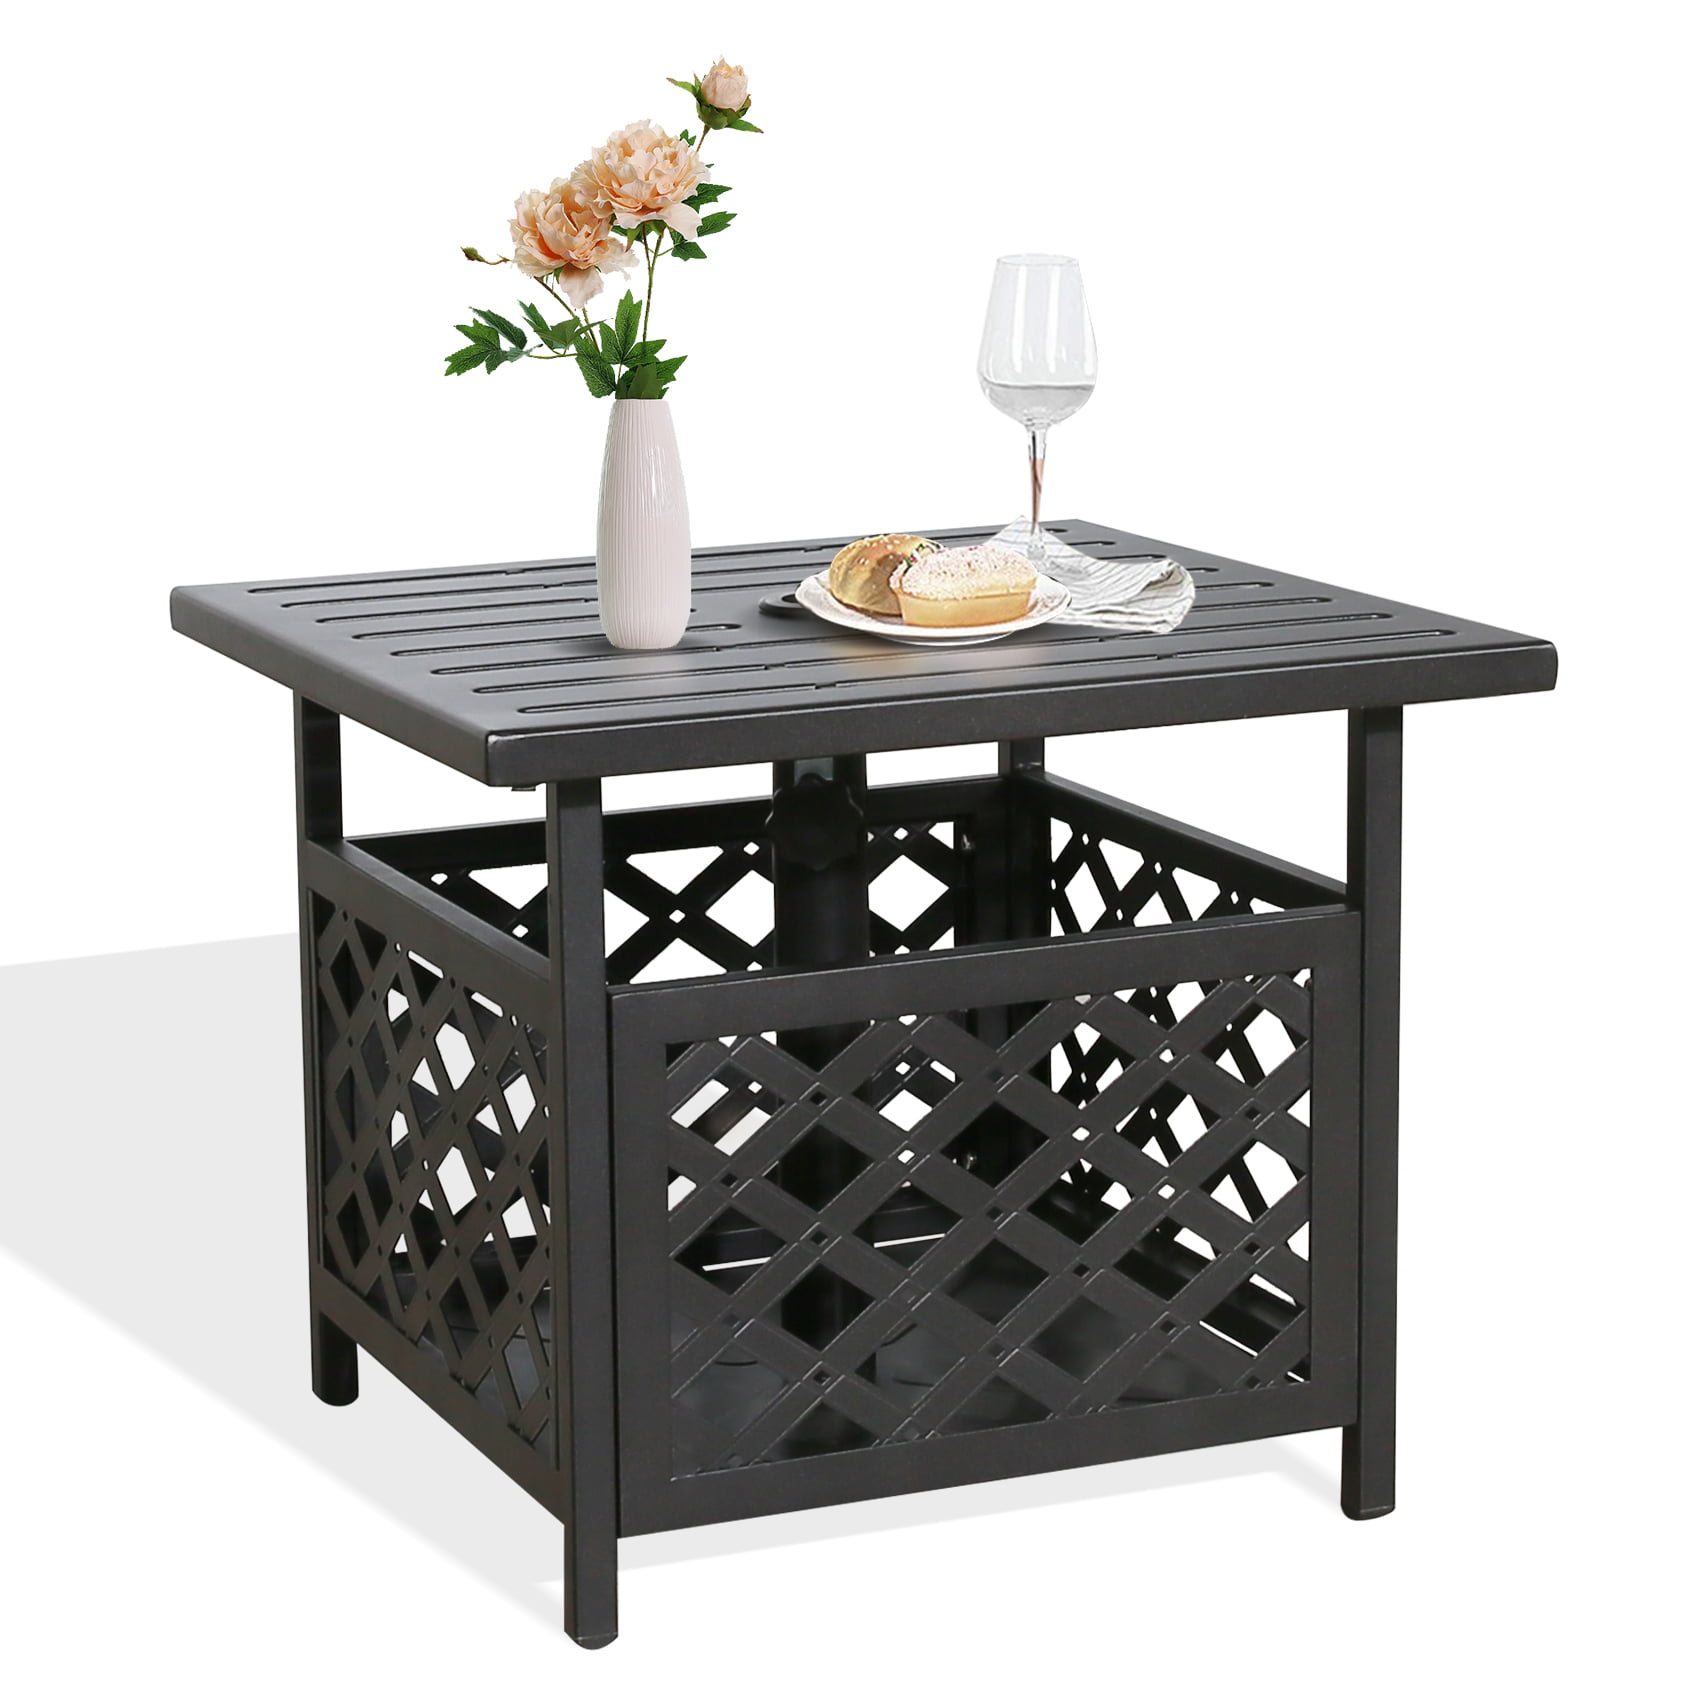 Ulax Furniture Outdoor Patio Umbrella Side Table Stand  